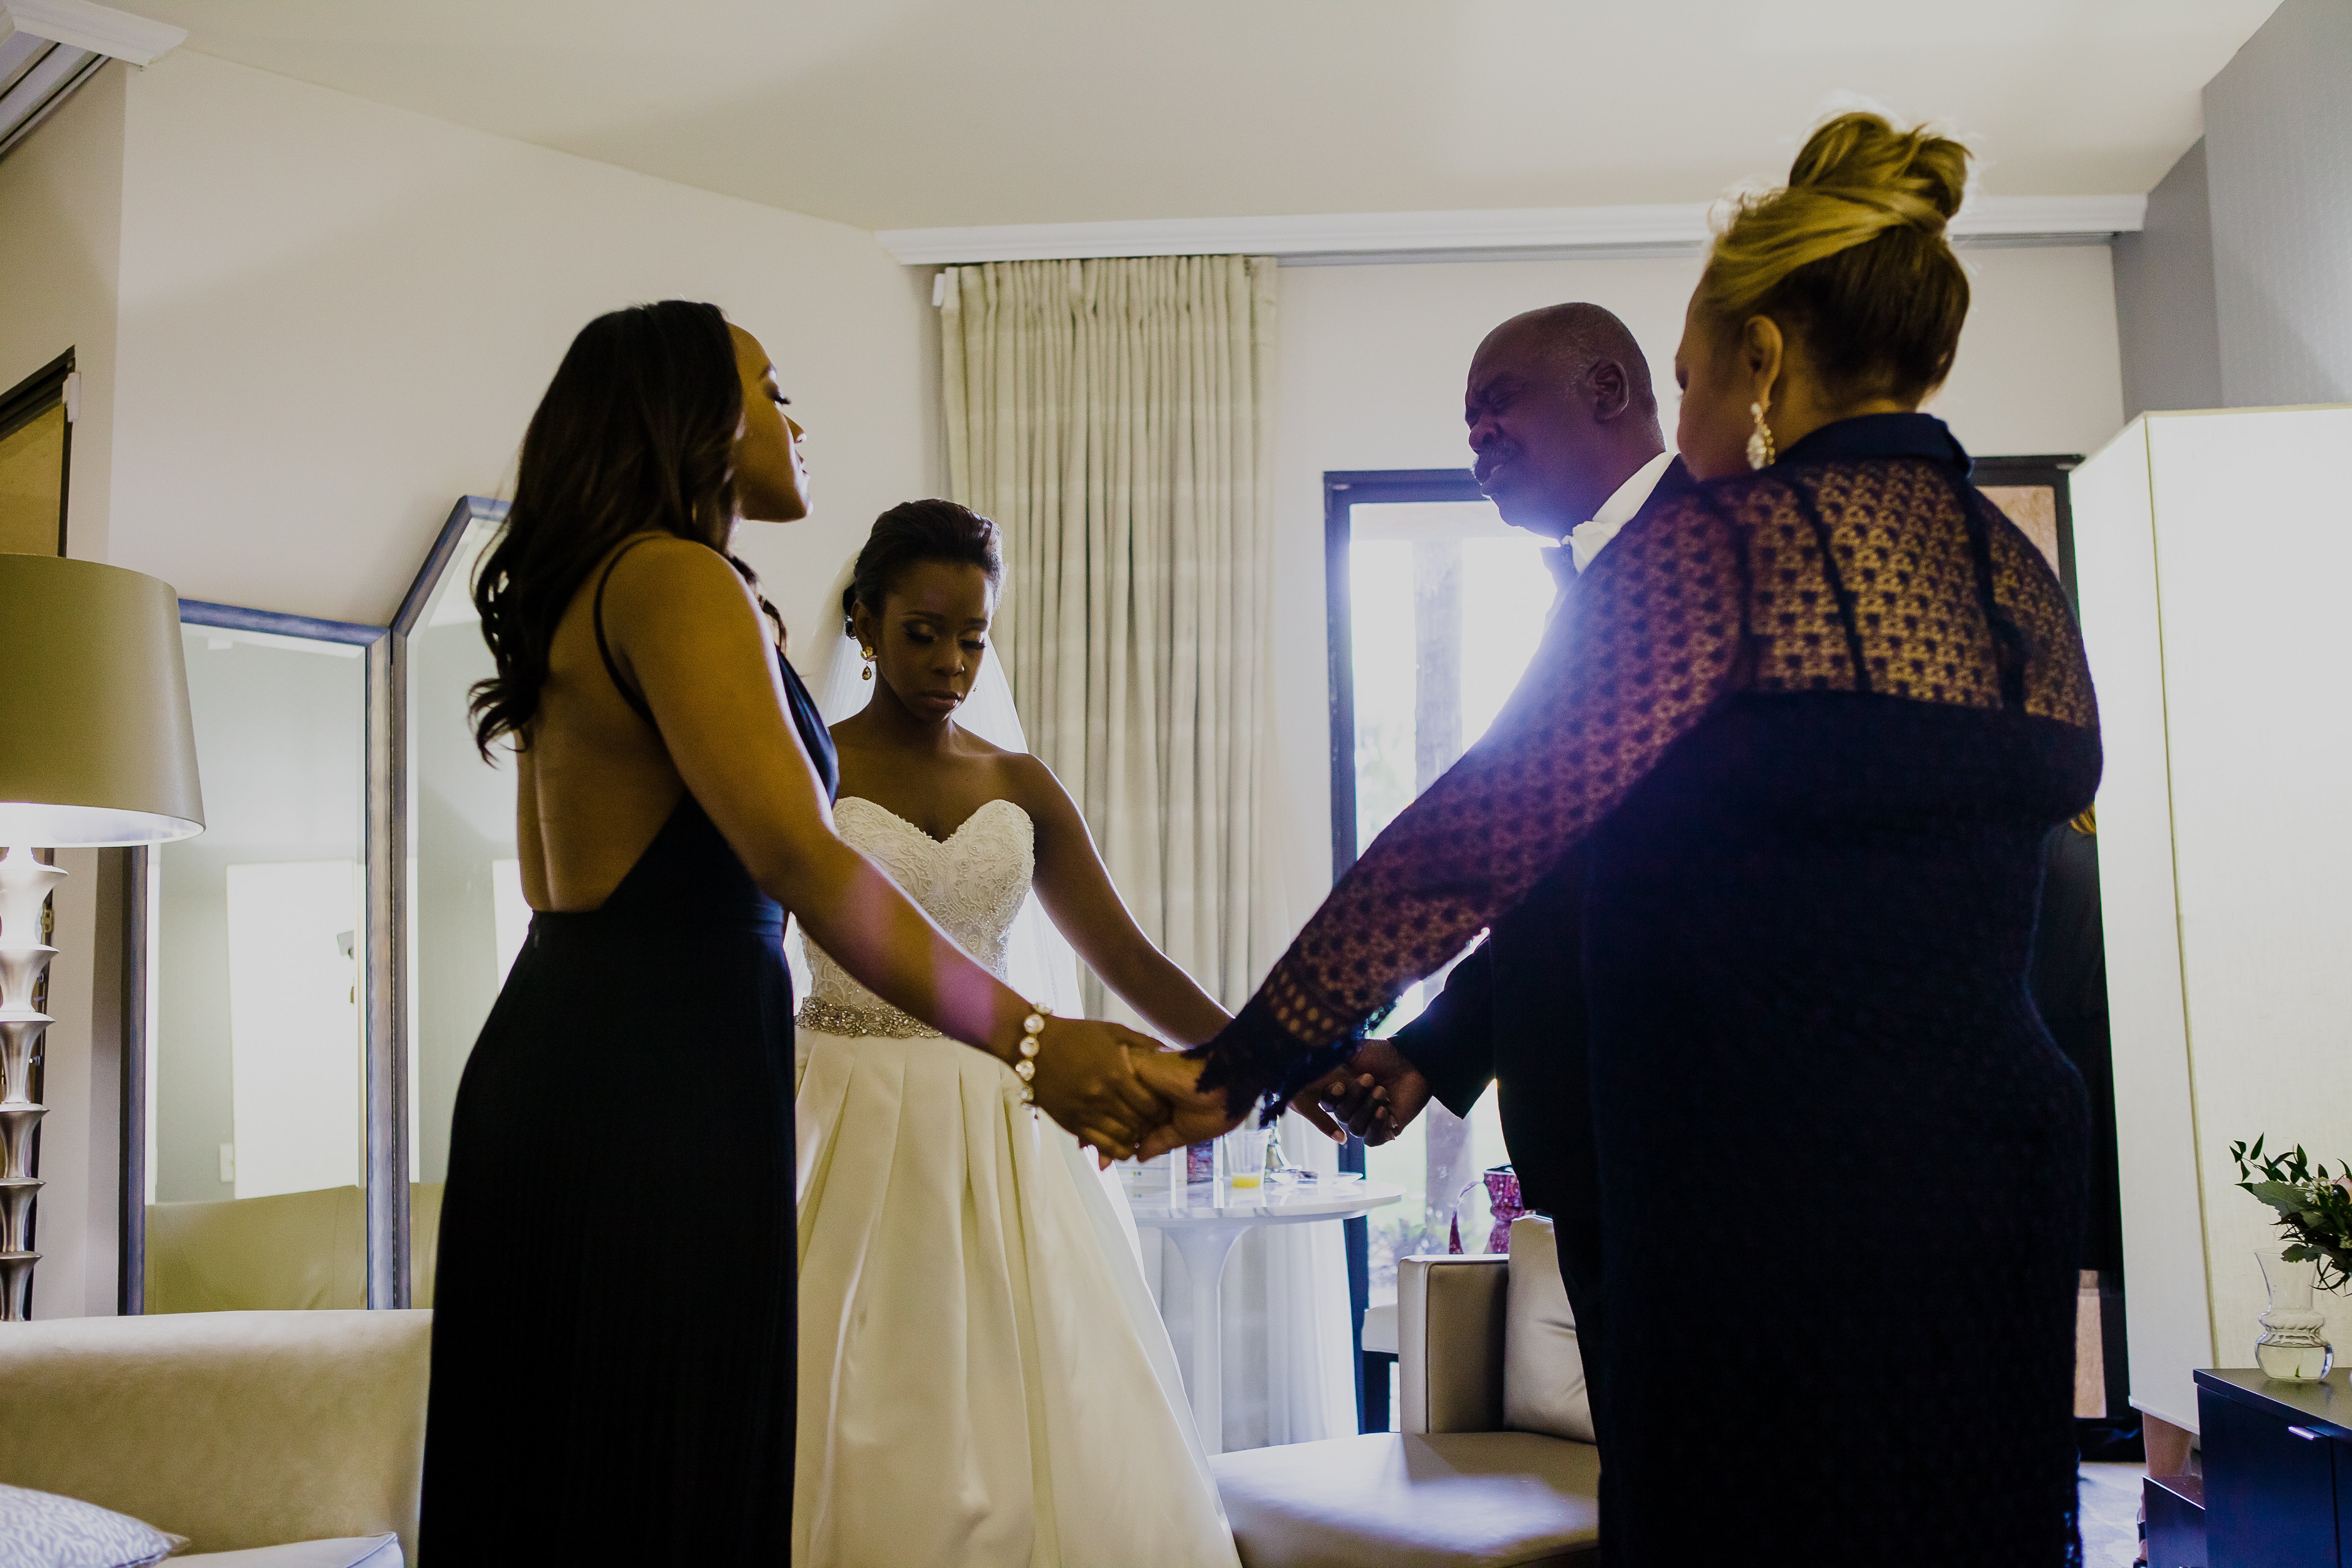 Bridal Bliss: Michael and Hollani's Sweet Florida Ceremony Is As Good As It Gets
